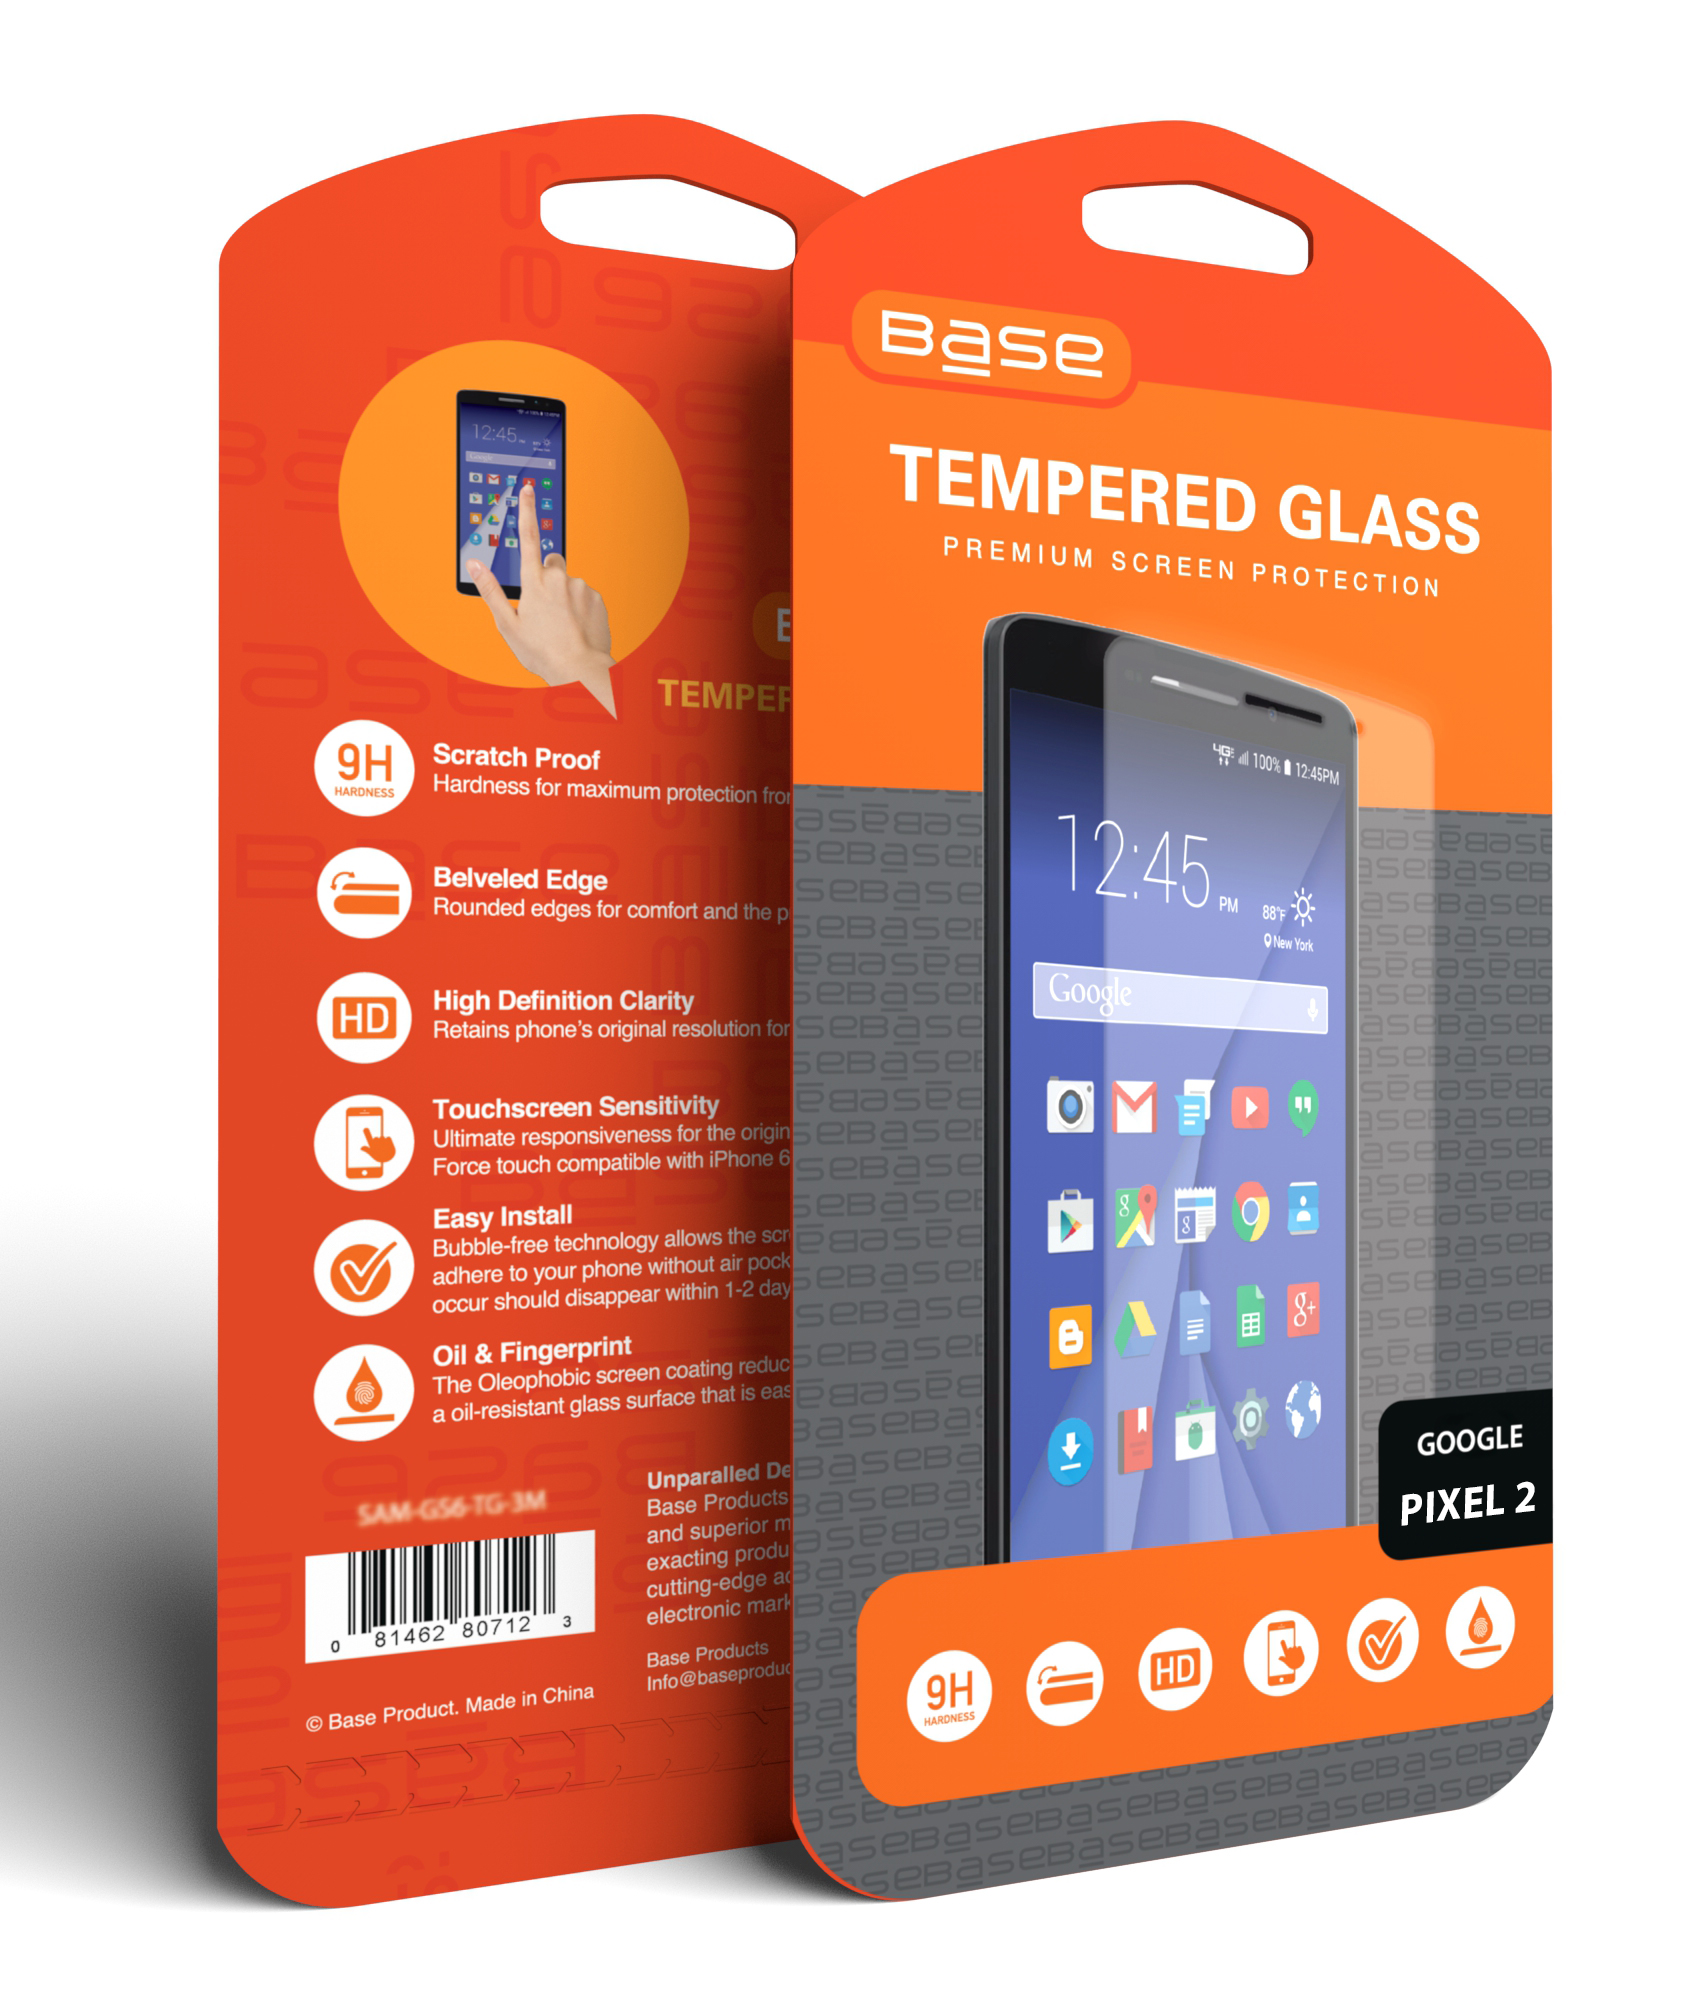 Tempered glass screen protector with beveled edges for Galaxy S7 cell phones